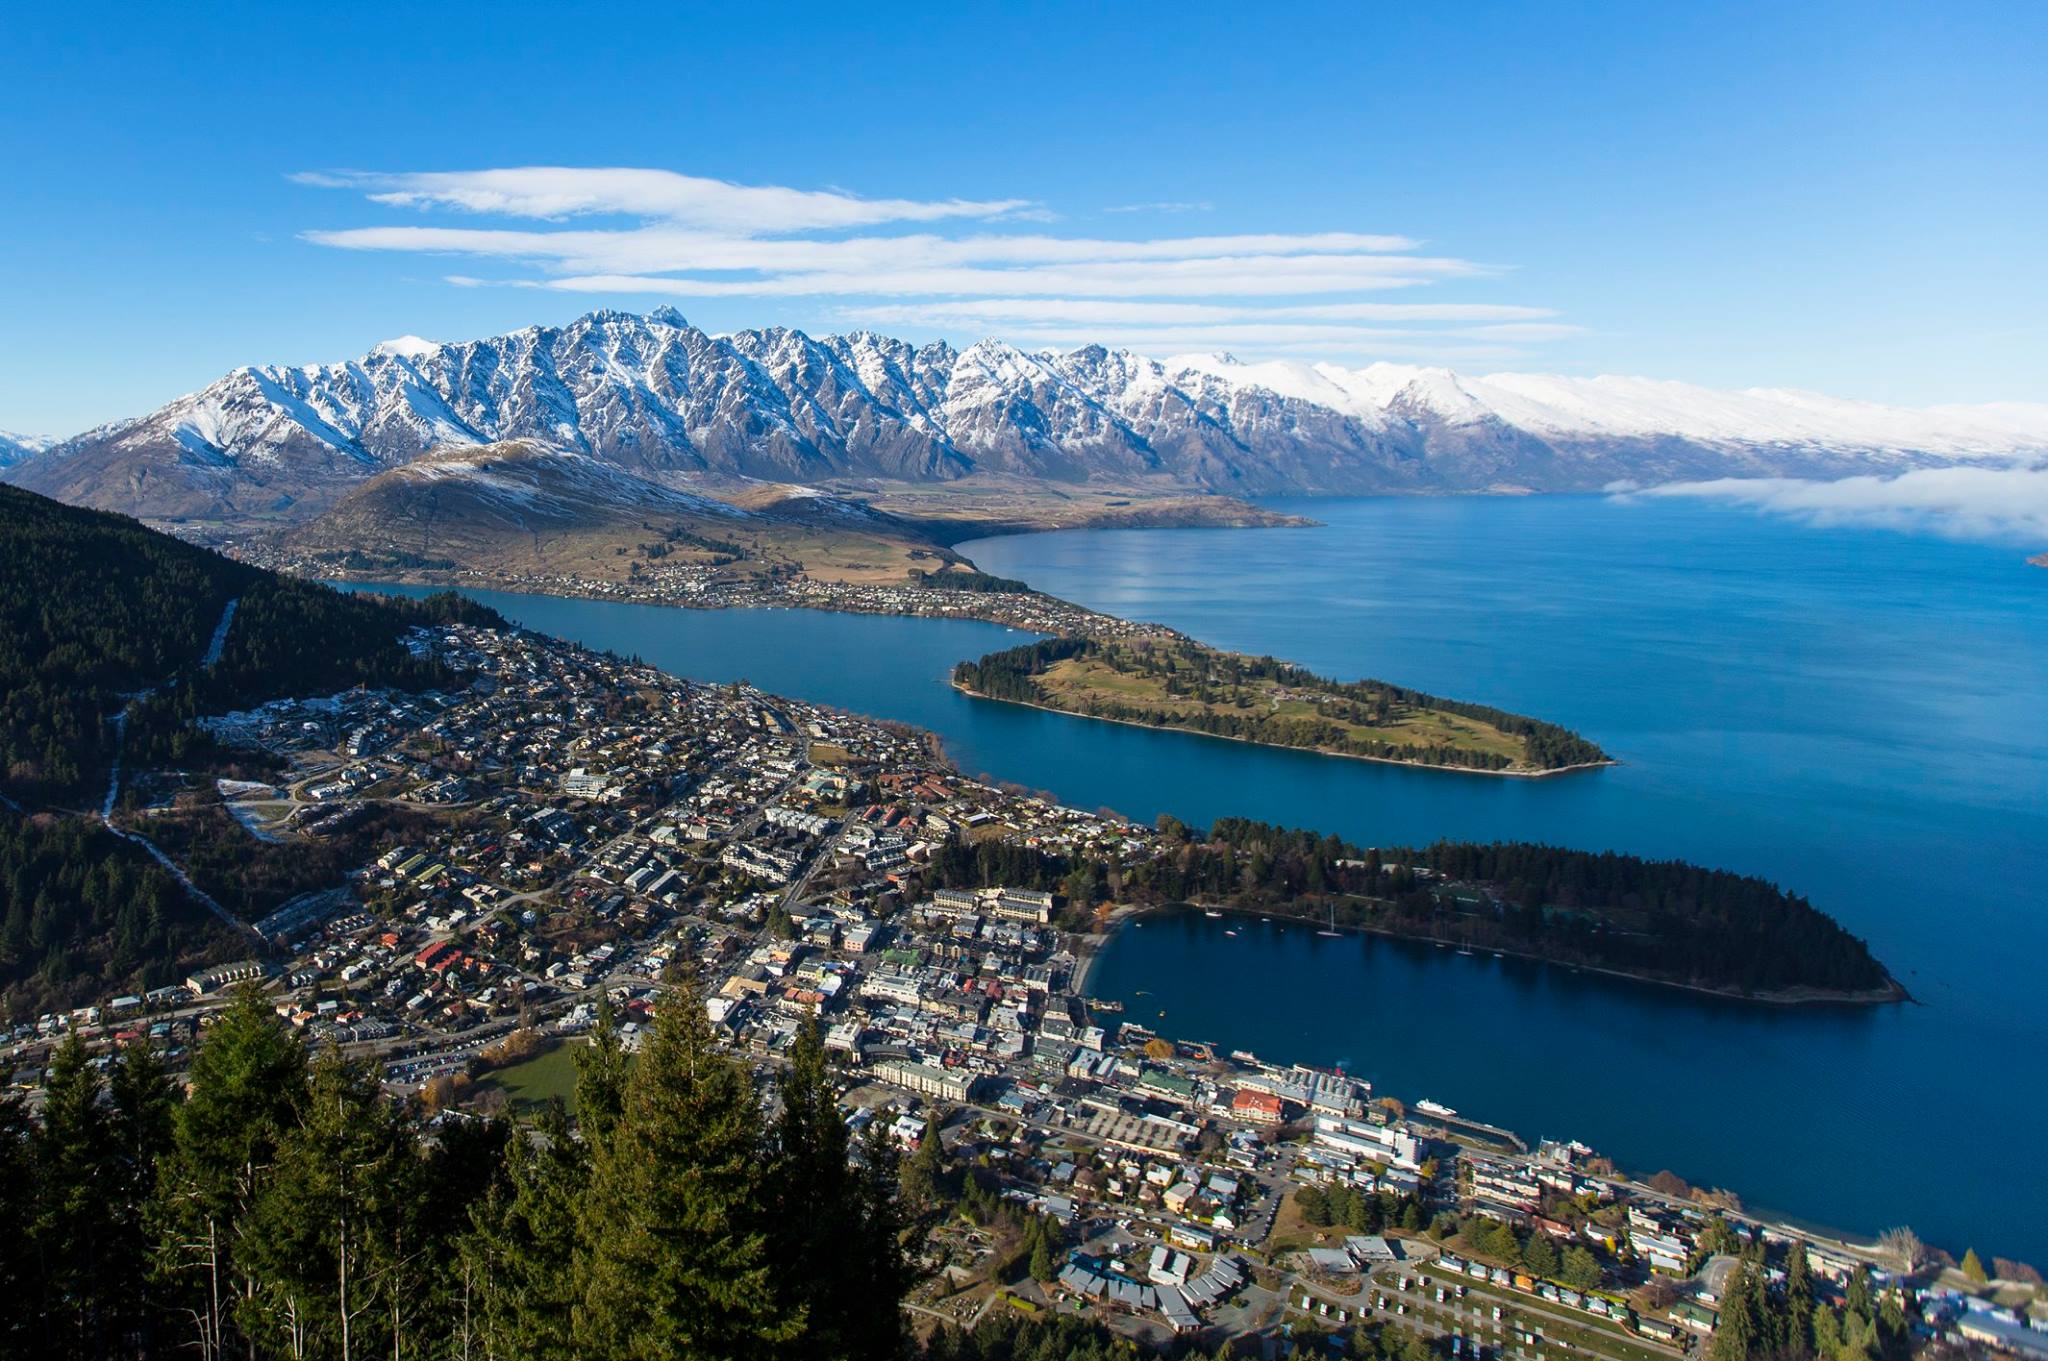 Queenstown has a unique and spectacular setting, surrounded by The Remarkables